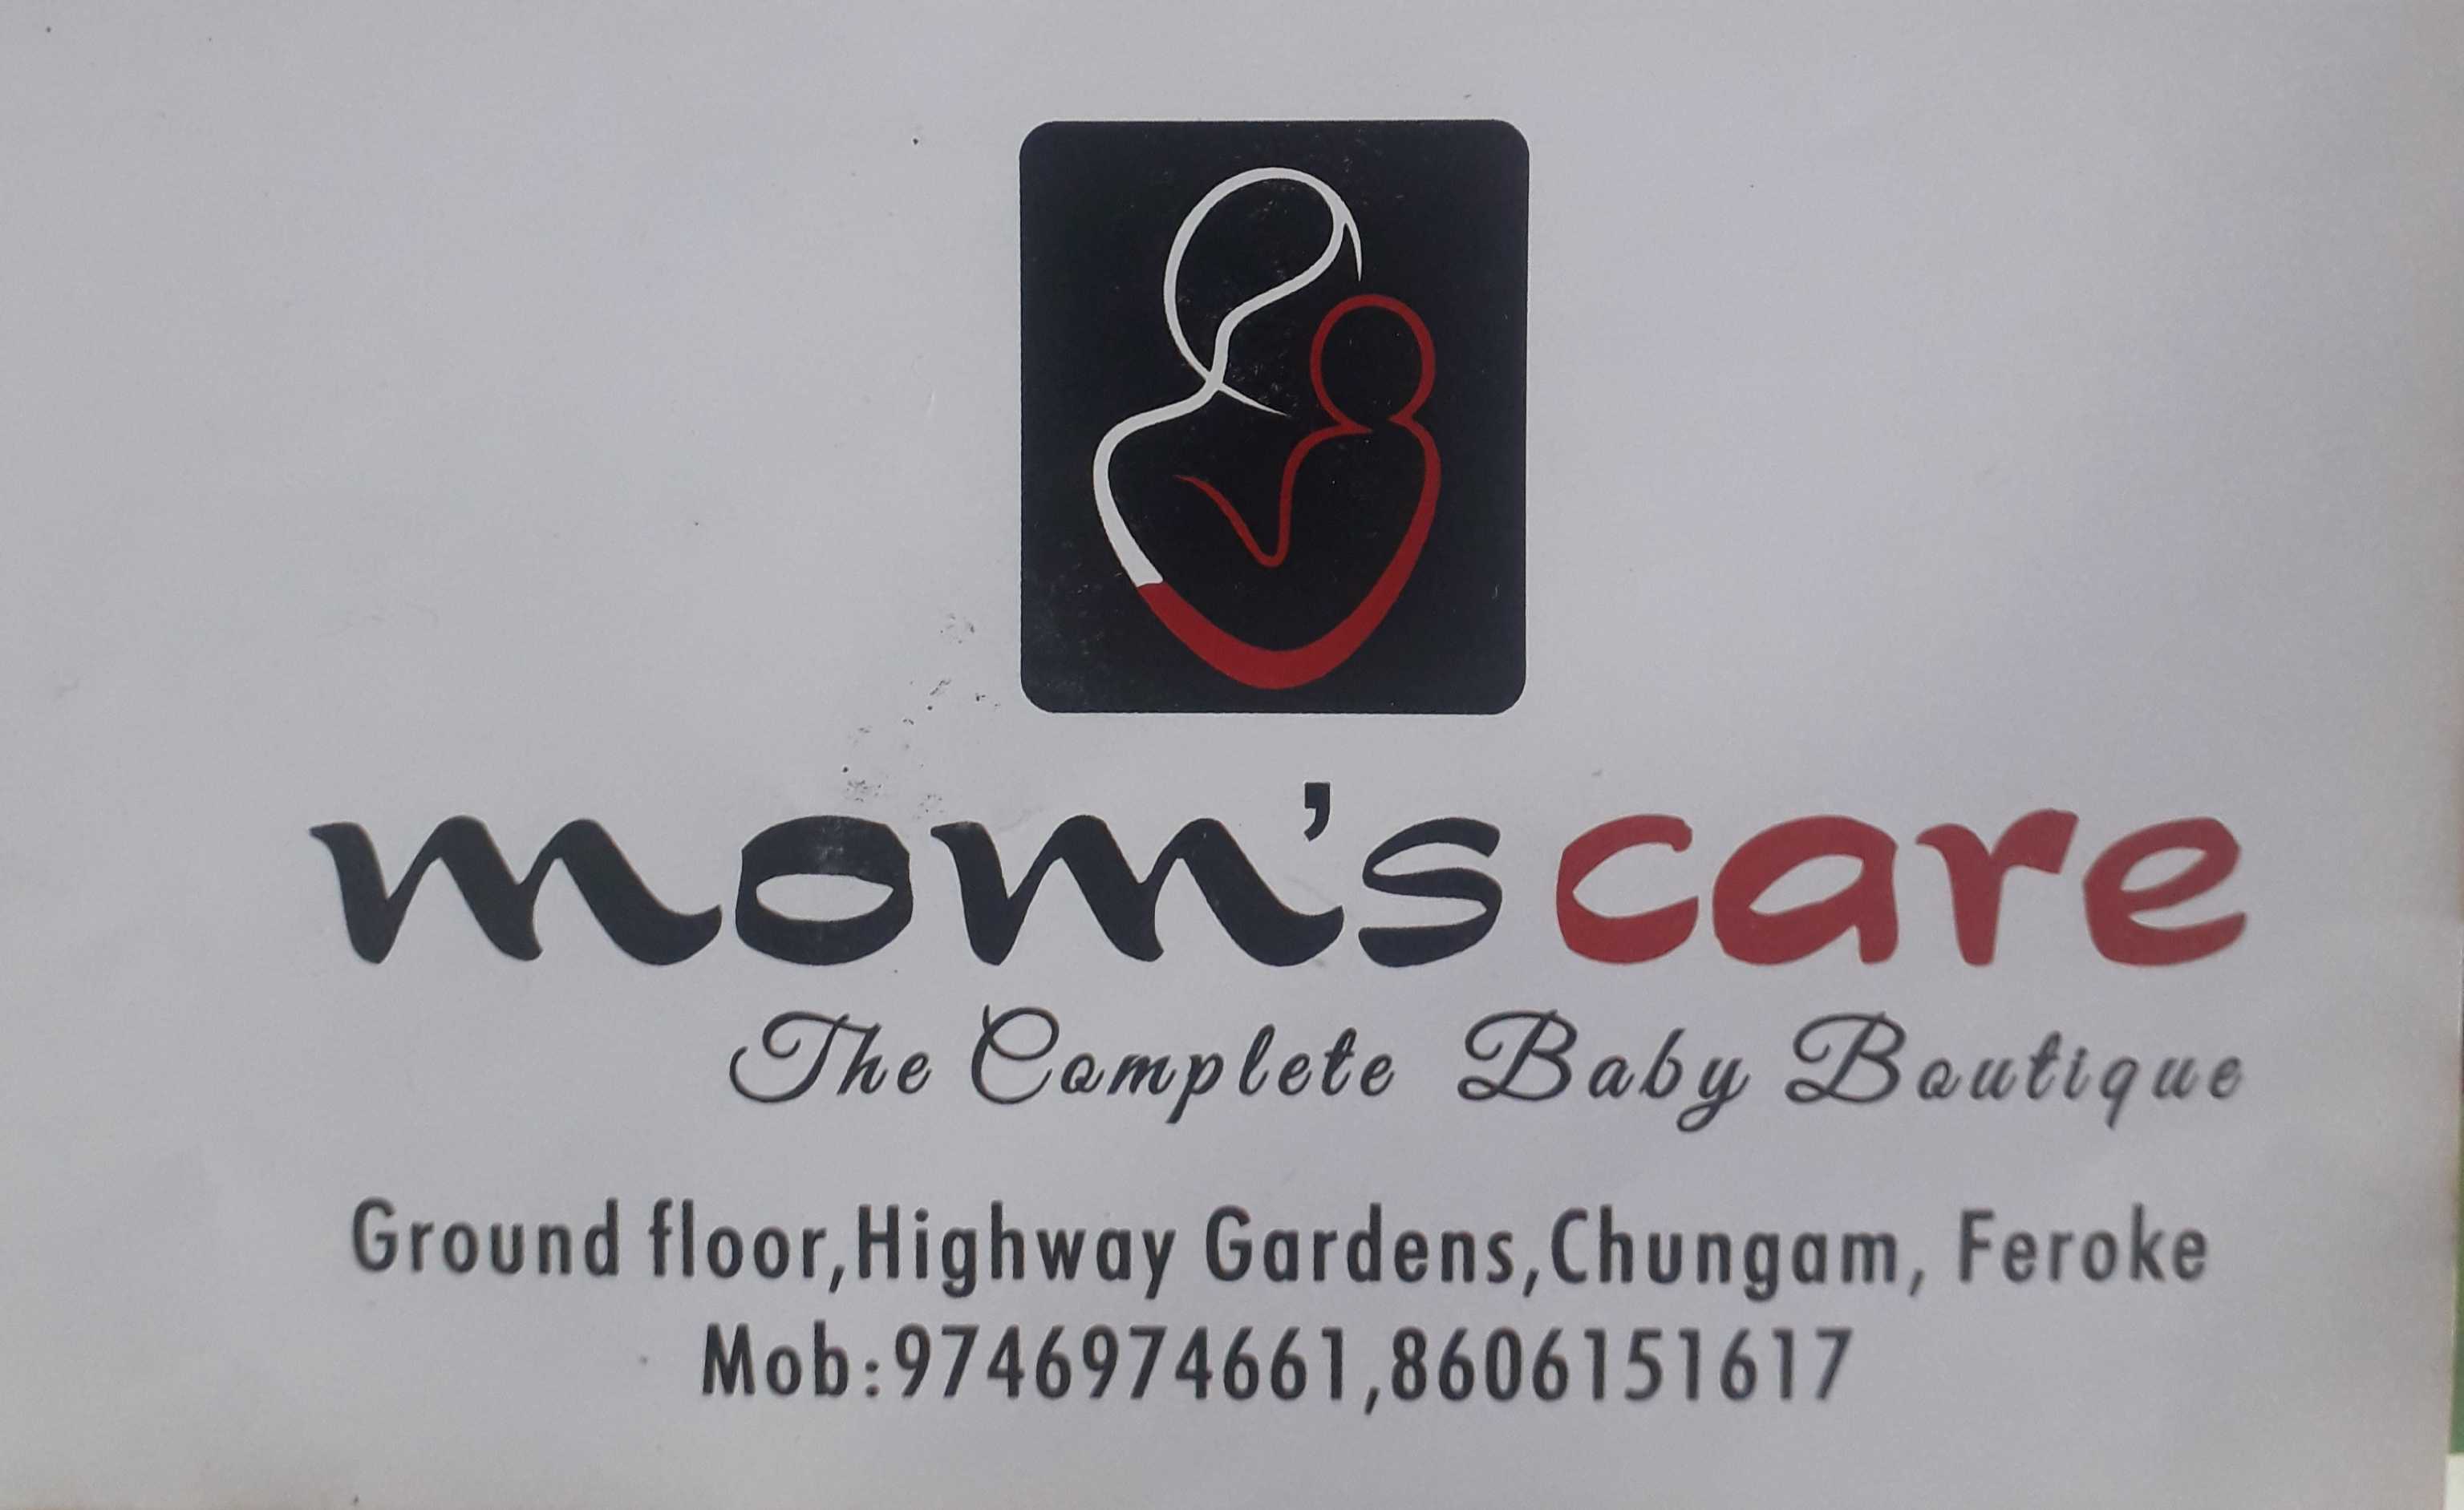 MOM'S CARE  the complete baby boutique, LADIES & KIDS WEAR,  service in Farooke, Kozhikode